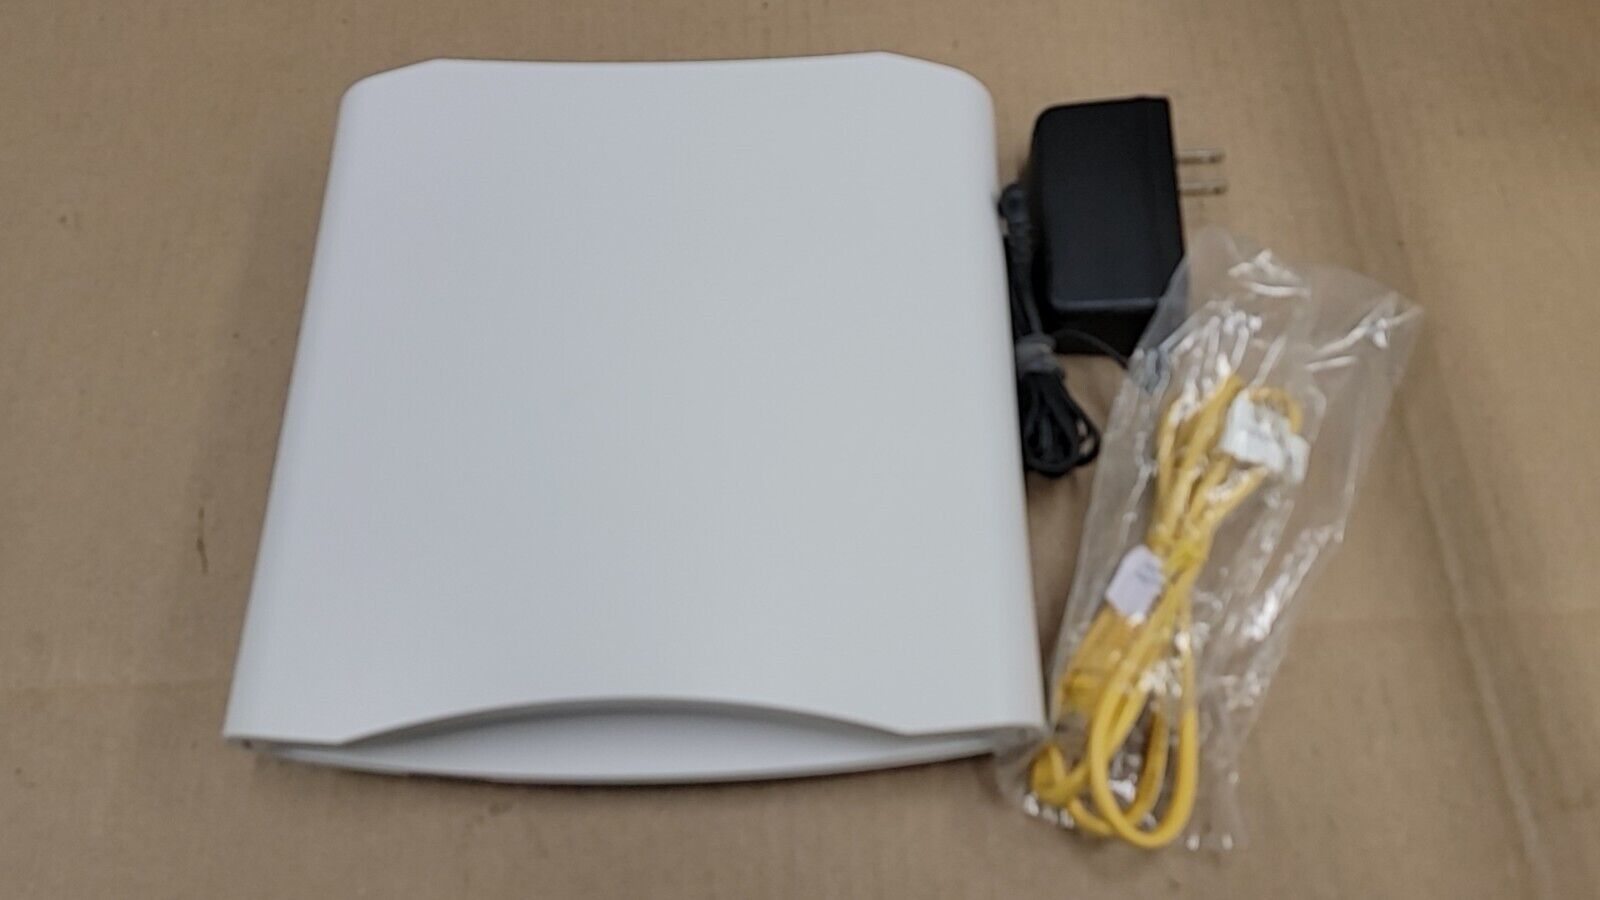 Ruckus Wireless ZoneFlex R710 Dual Band Access Point 901-R710-US00with AC